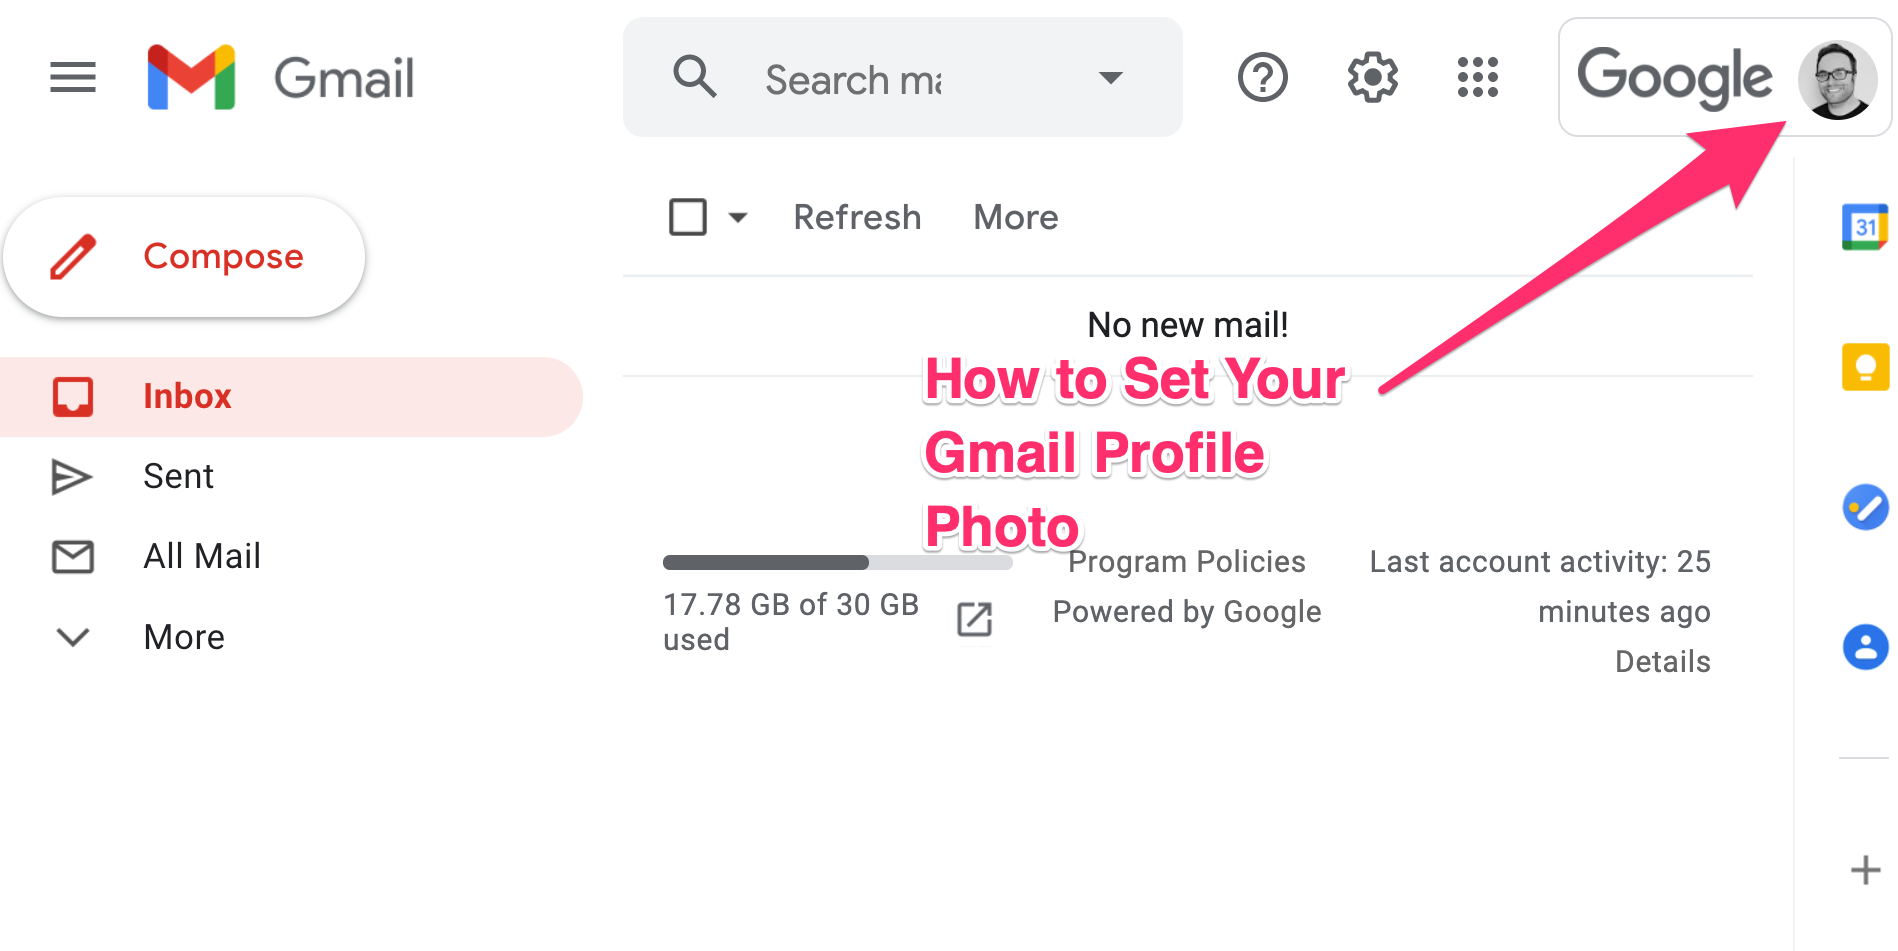 Profile picture is uploaded but icon photo wont change  Gmail Community